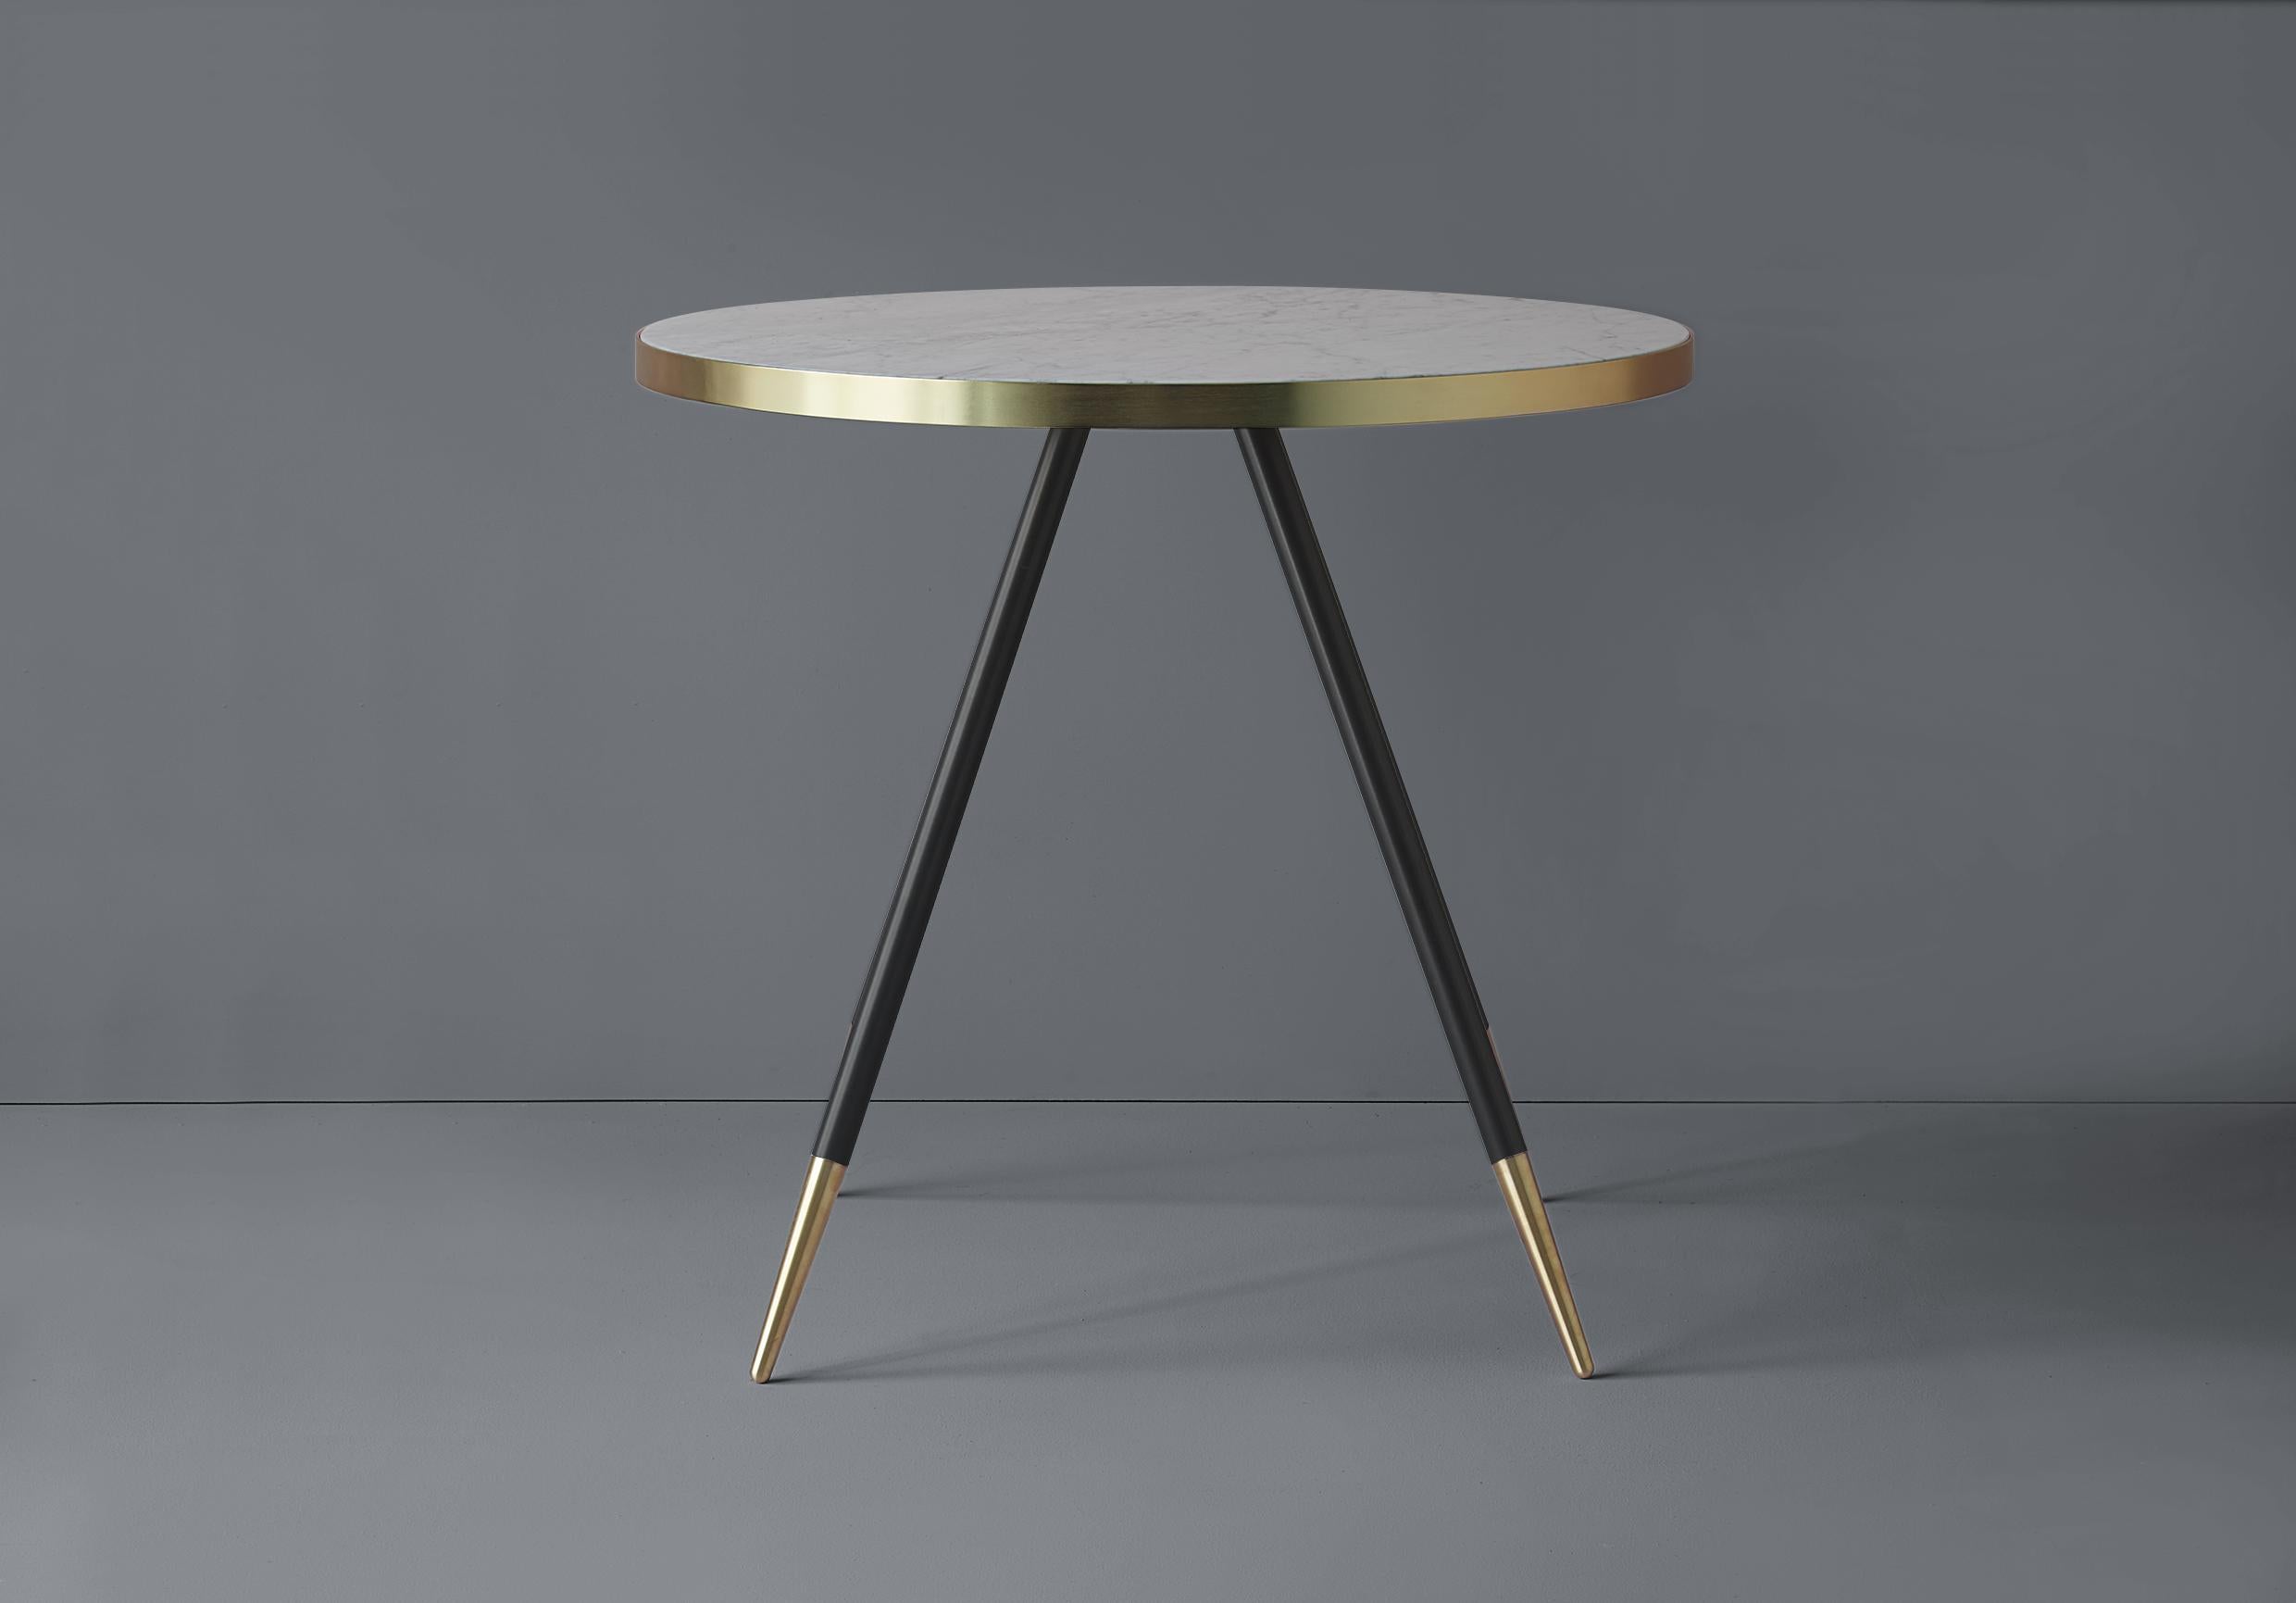 Bethan Gray has been inspired by pairing the natural beauty of coloured marble together with warm brushed brass to
create her Band range of tables. For this range, solid marble is encased in a warm and elegant metallic rim to bring a
distinctive,